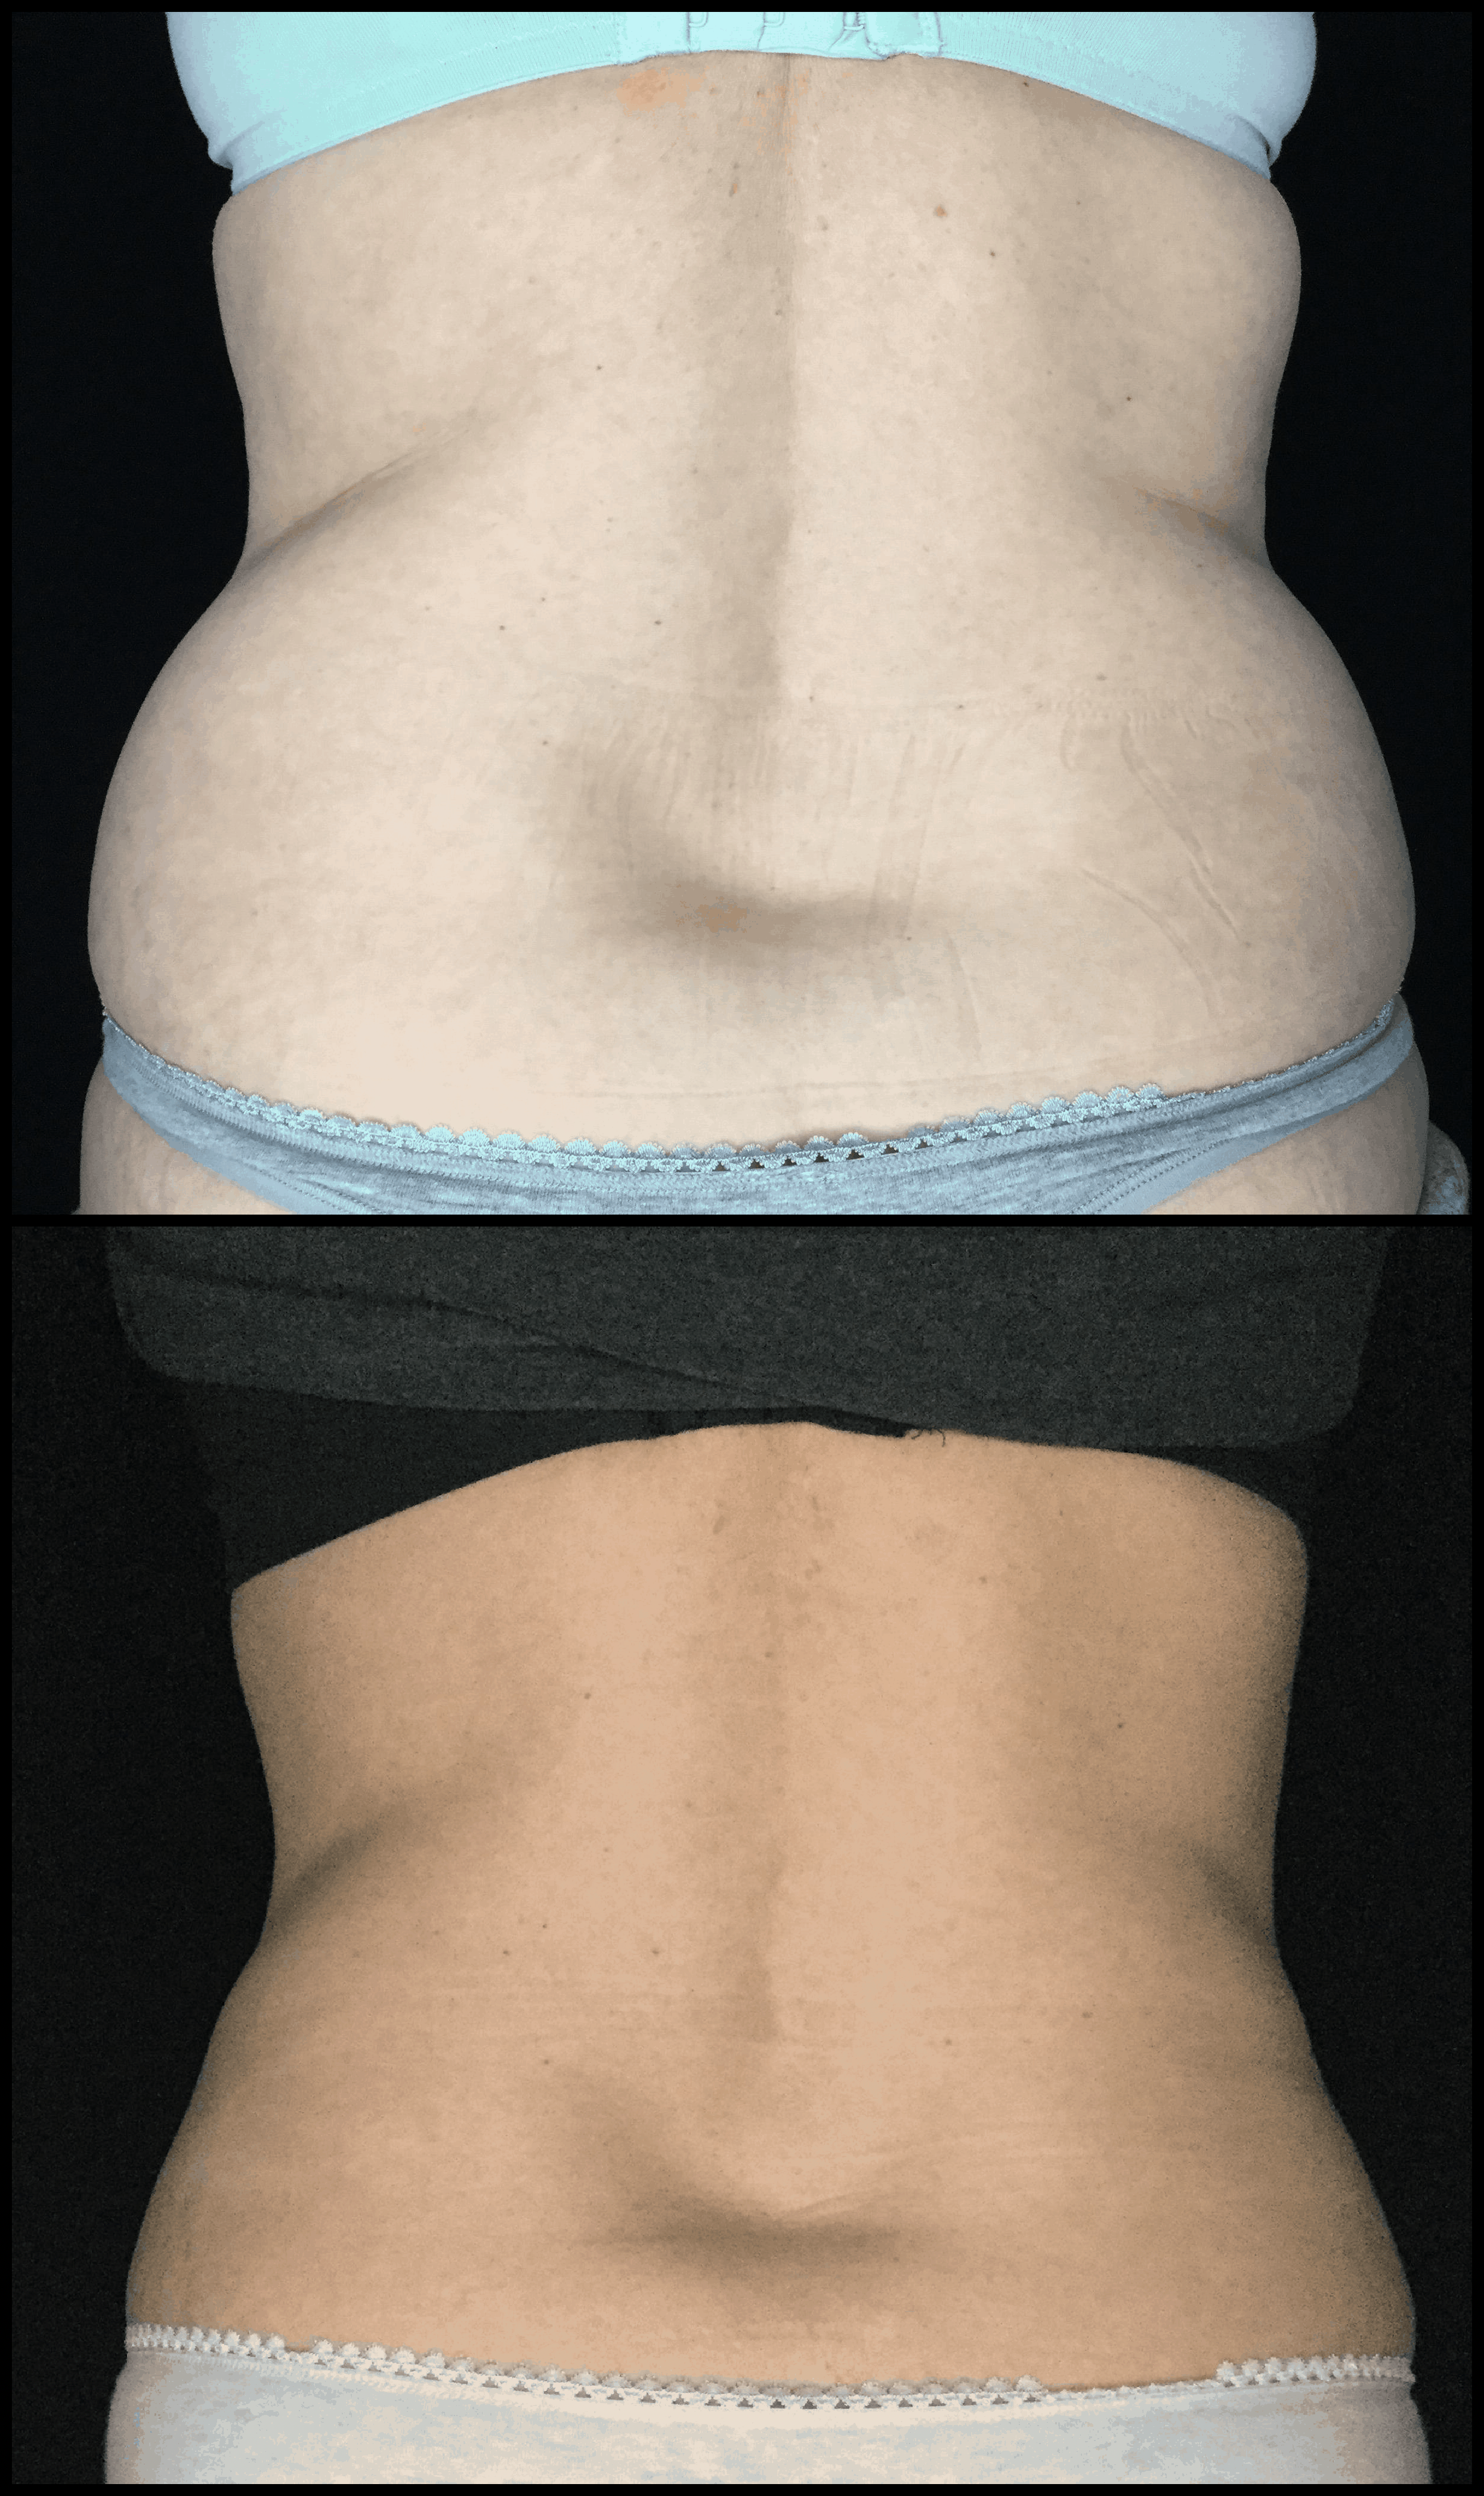 SHEER SCULPT COOLSCULPTING - 220 Wilmington West Chester Pike